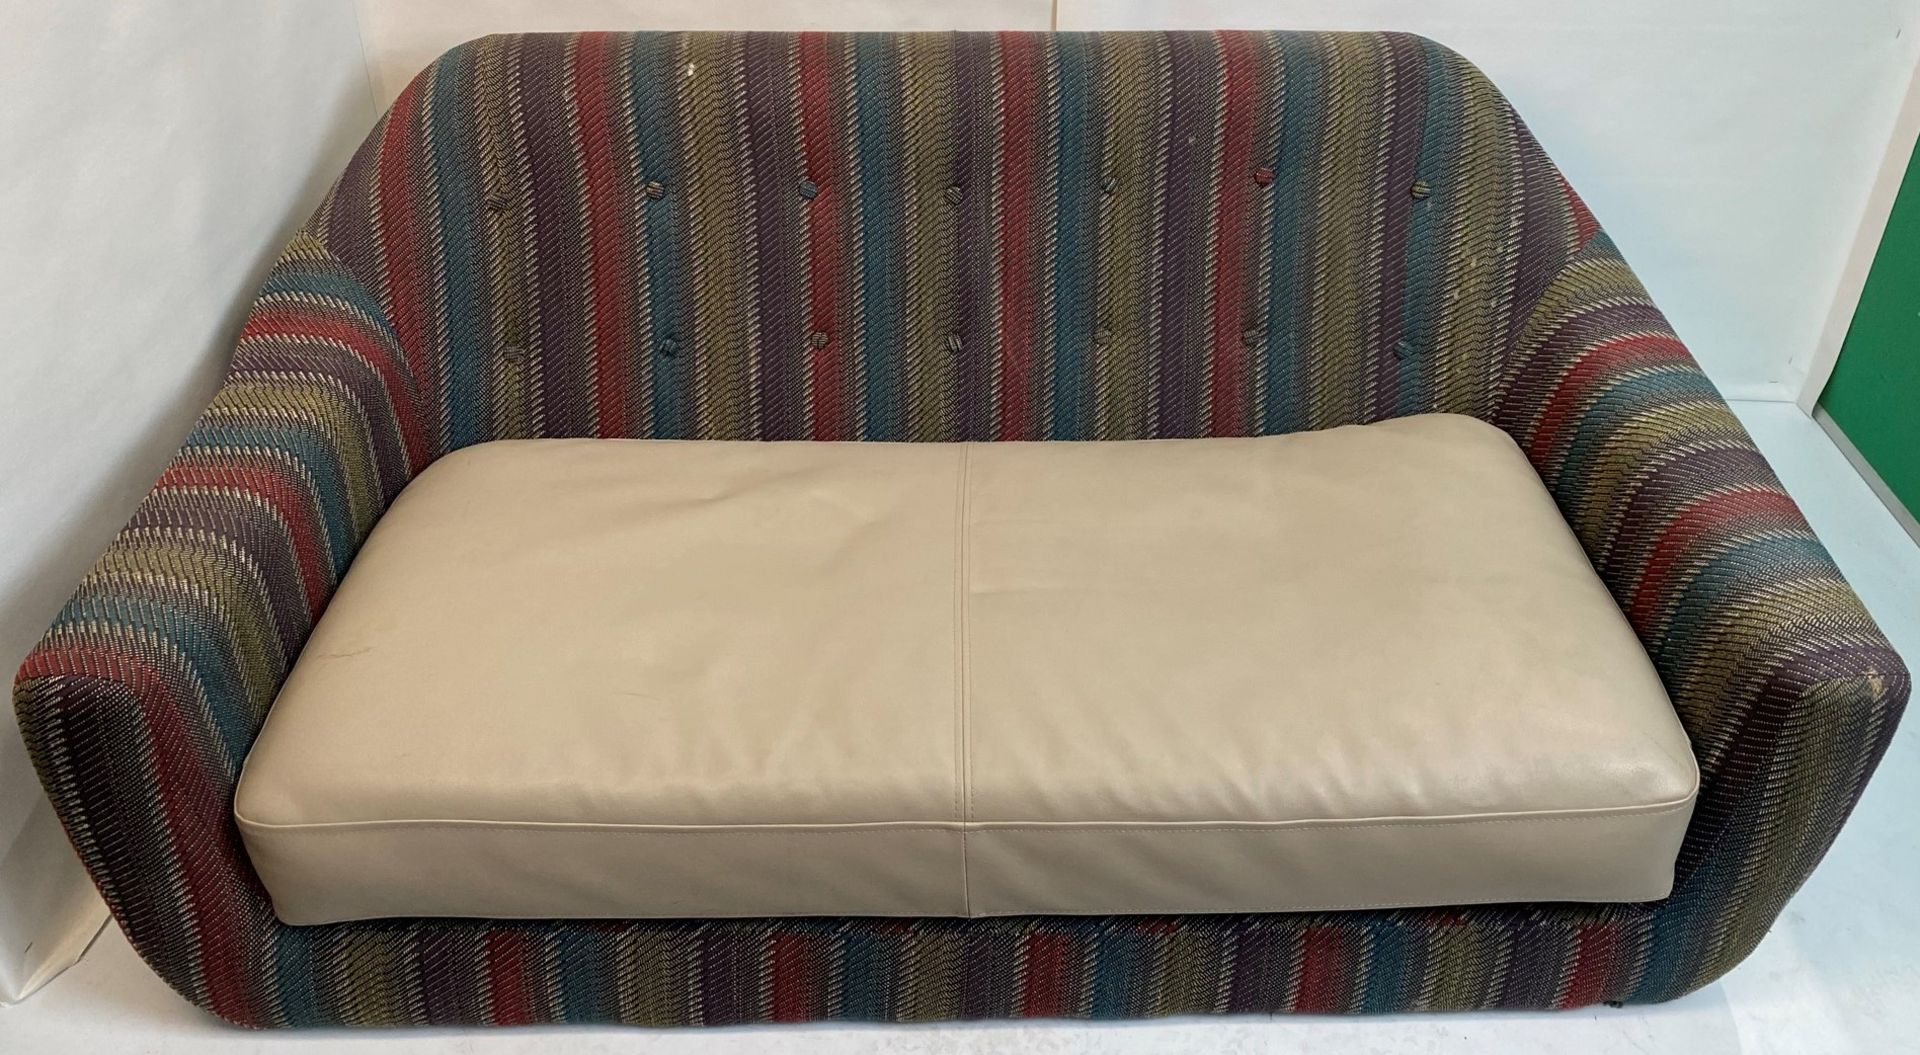 A Multicoloured striped fabric 2 seater sofa on 4 wooden legs